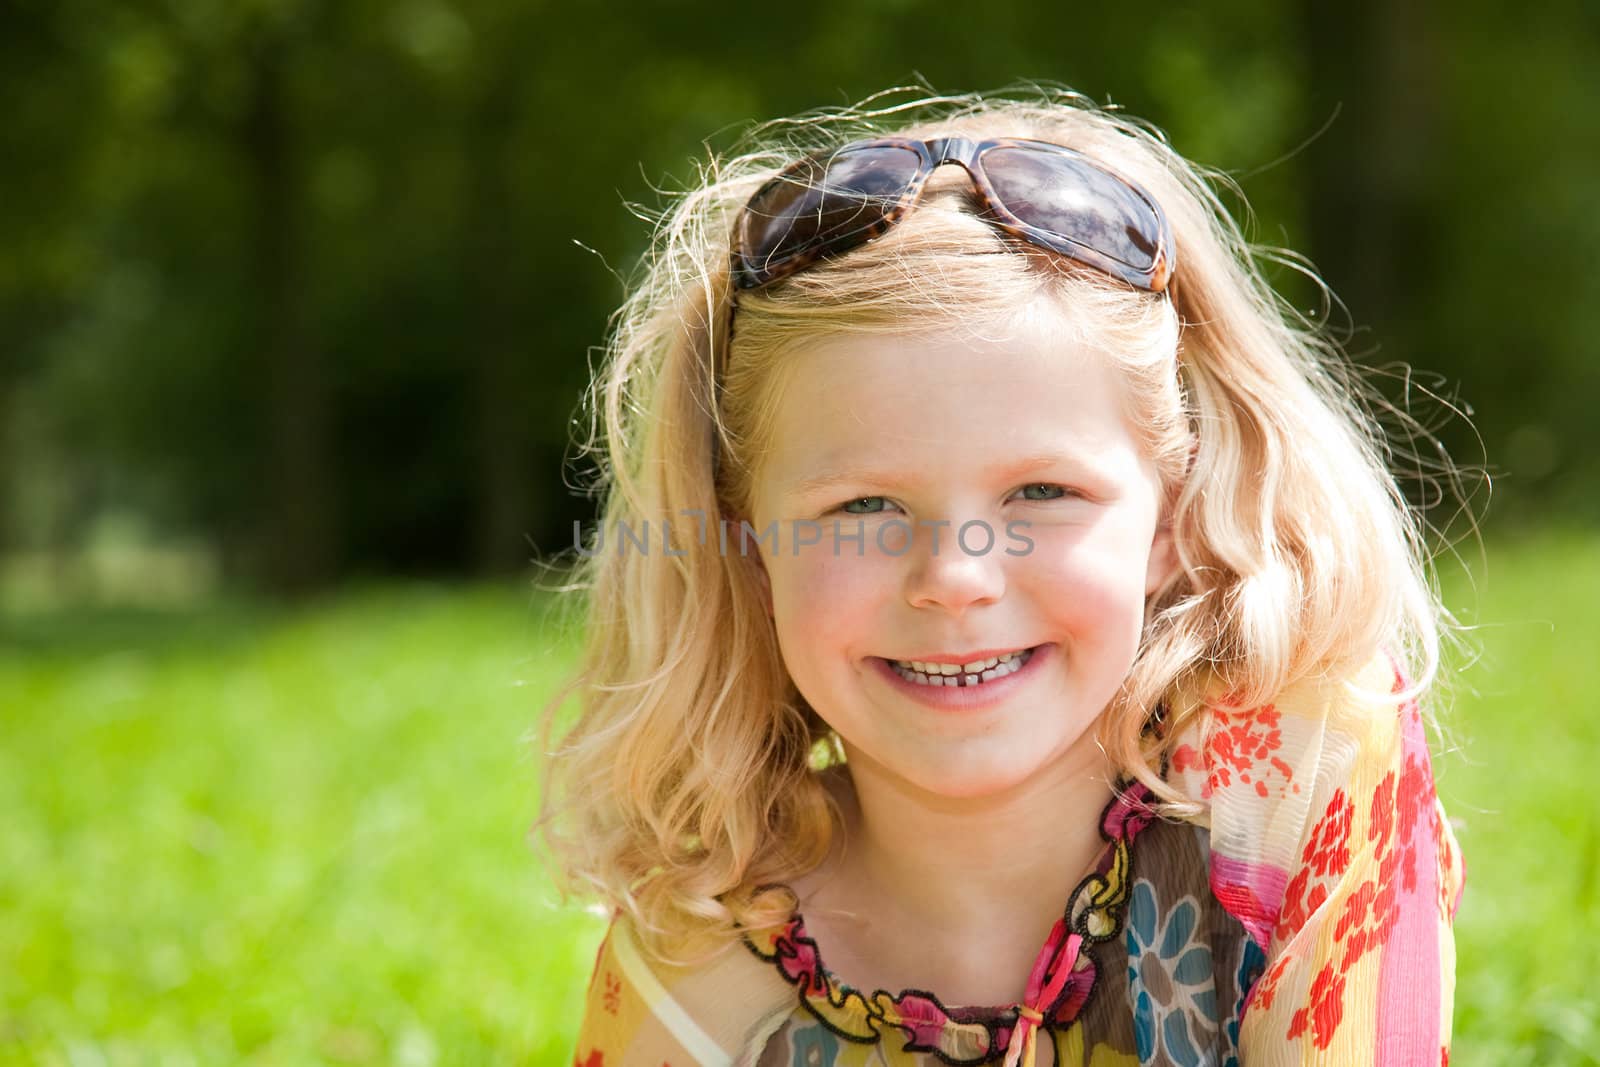 Cute young girl of 5 years old with her mothers sunglasses